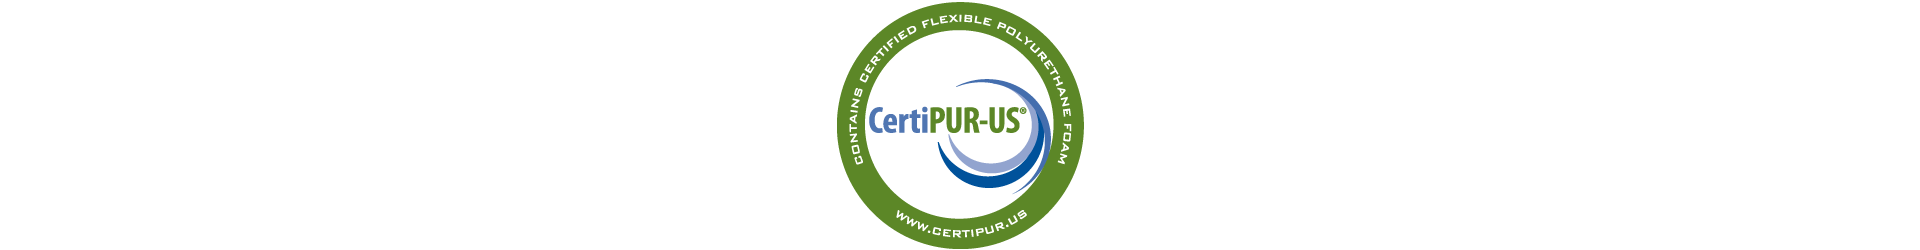 Contains Certified Flexible Polyurethane Foam - CertiPUR-US